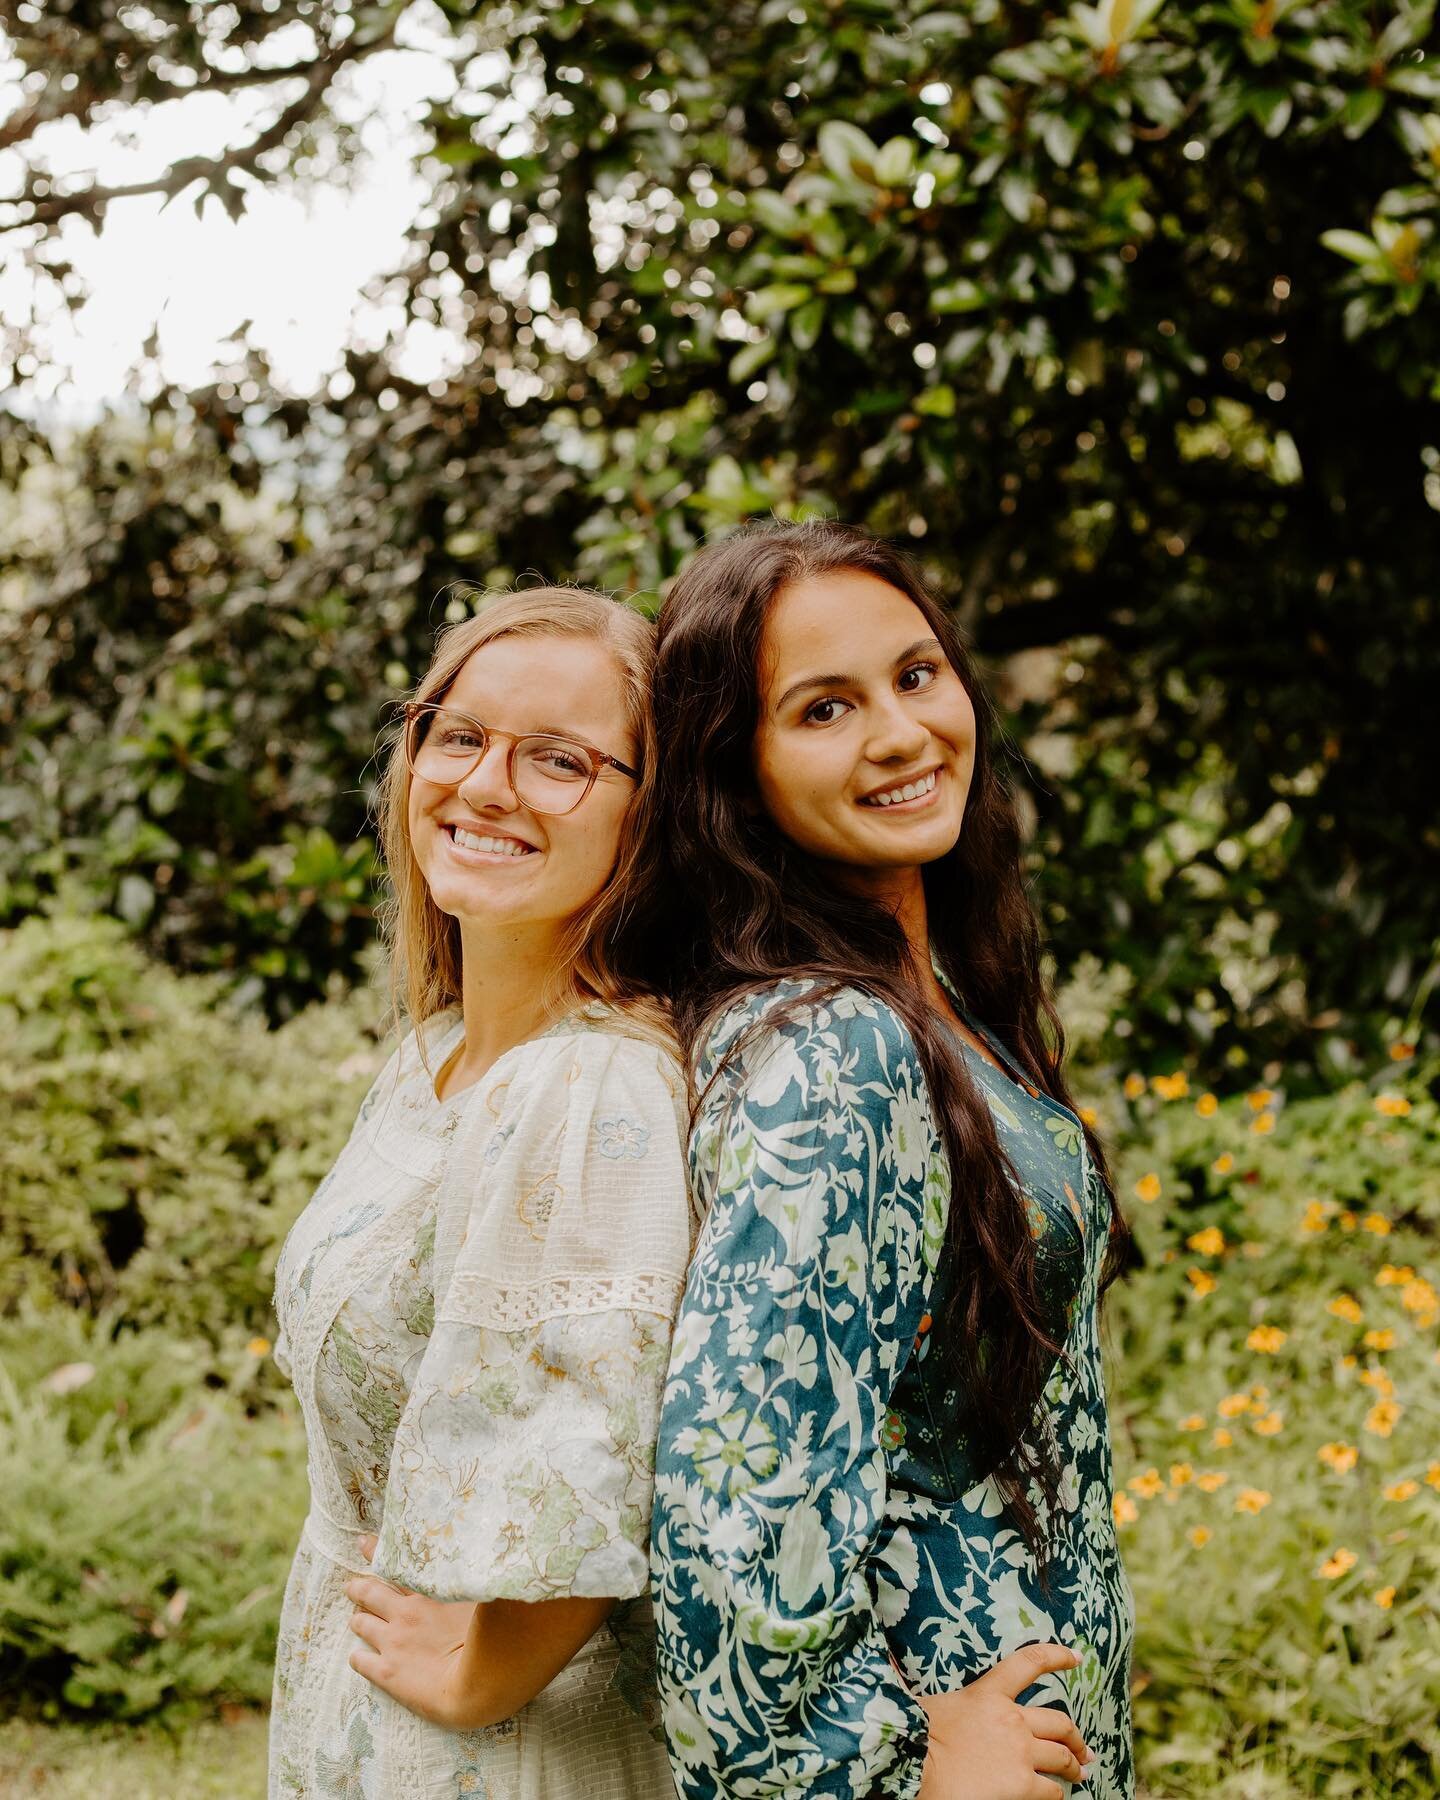 Don&rsquo;t miss out on a photoshoot with your best friend! 👱🏼&zwj;♀️👧🏻

#knoxville #tennessee #bestfriends #photo #photooftheday #photography #photographer #easttennessee